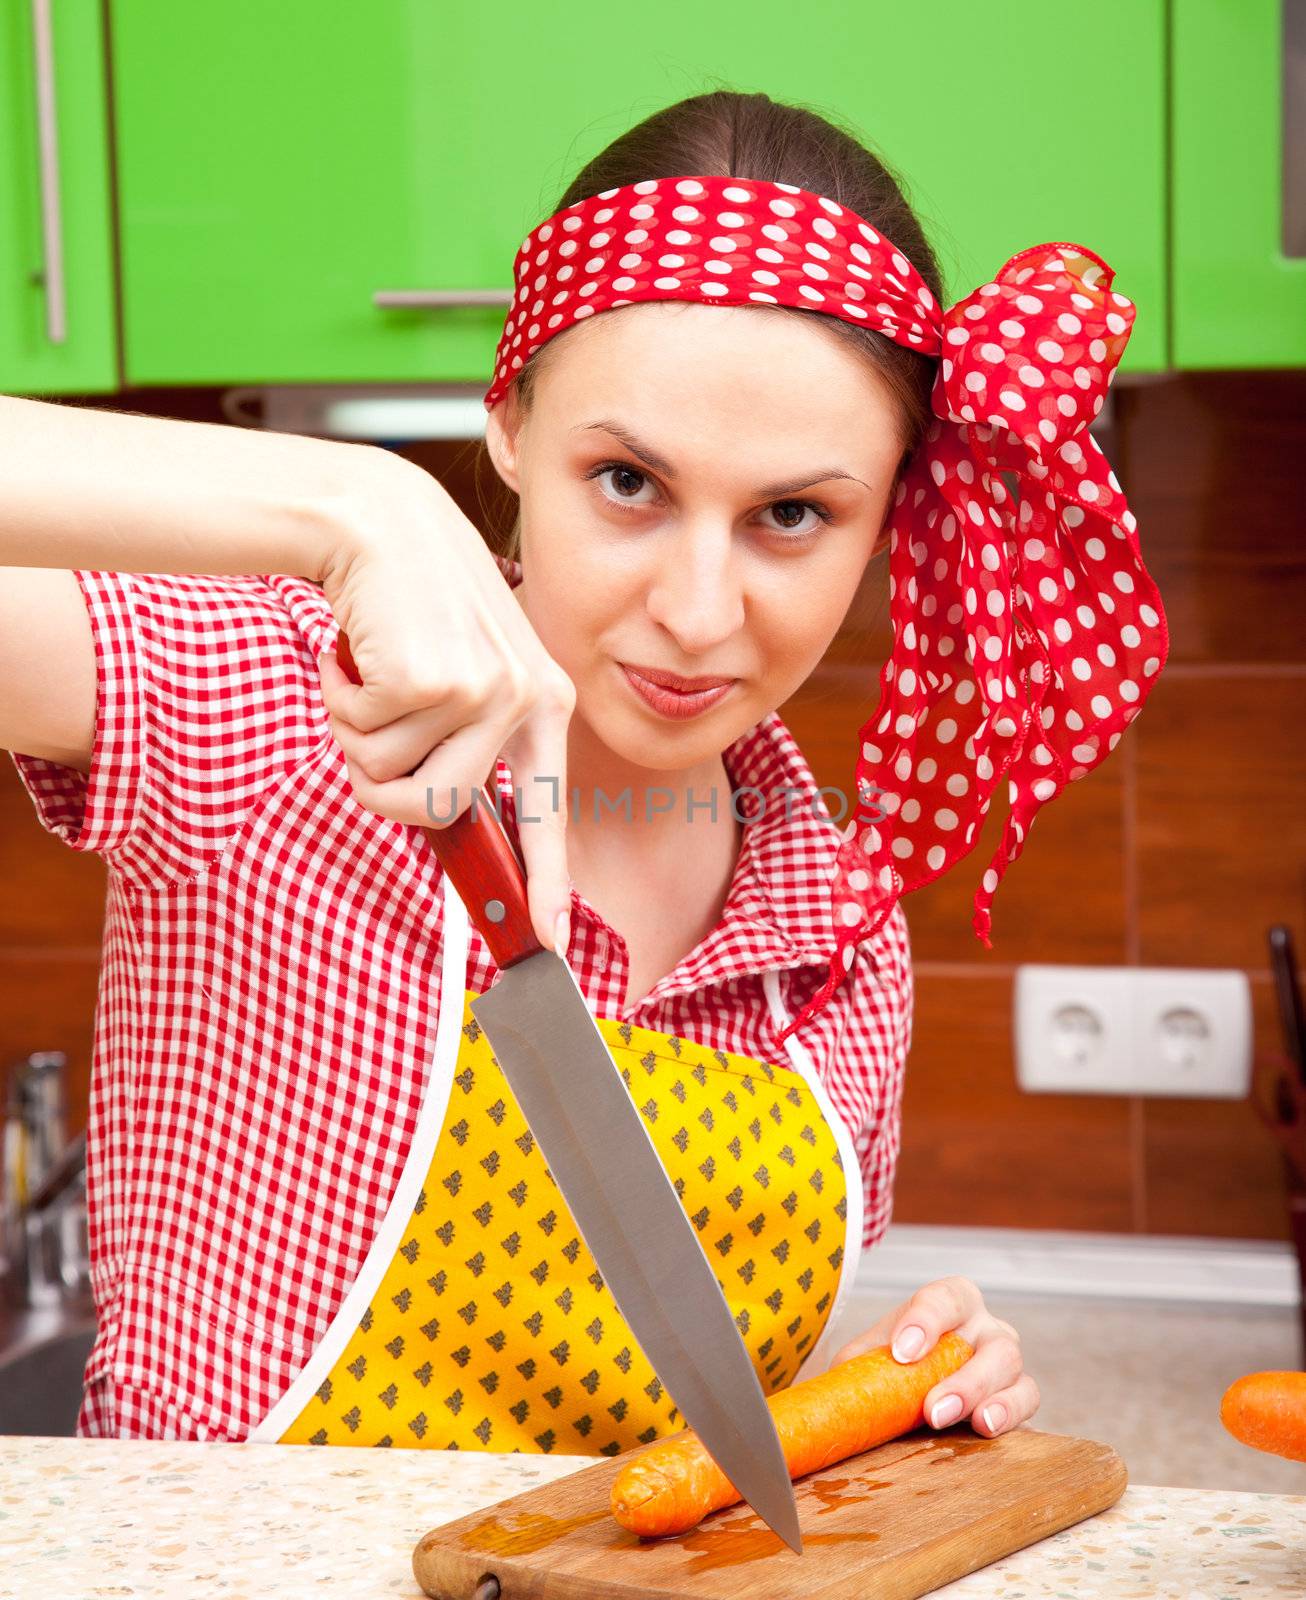 Woman in the kitchen with knife and vegetables by iryna_rasko